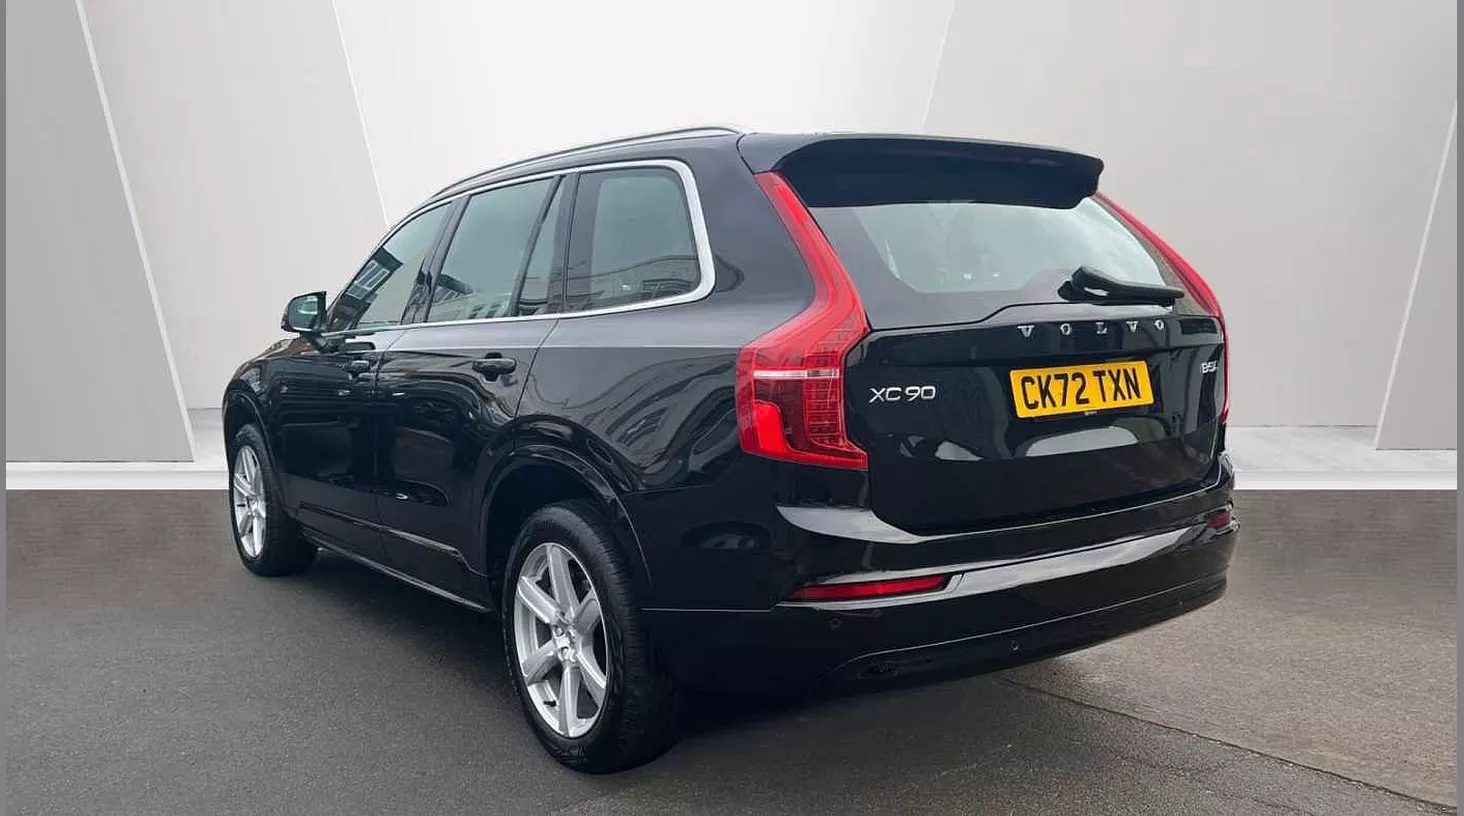 Volvo XC90 2.0 B5P [250] Core 5dr AWD Geartronic